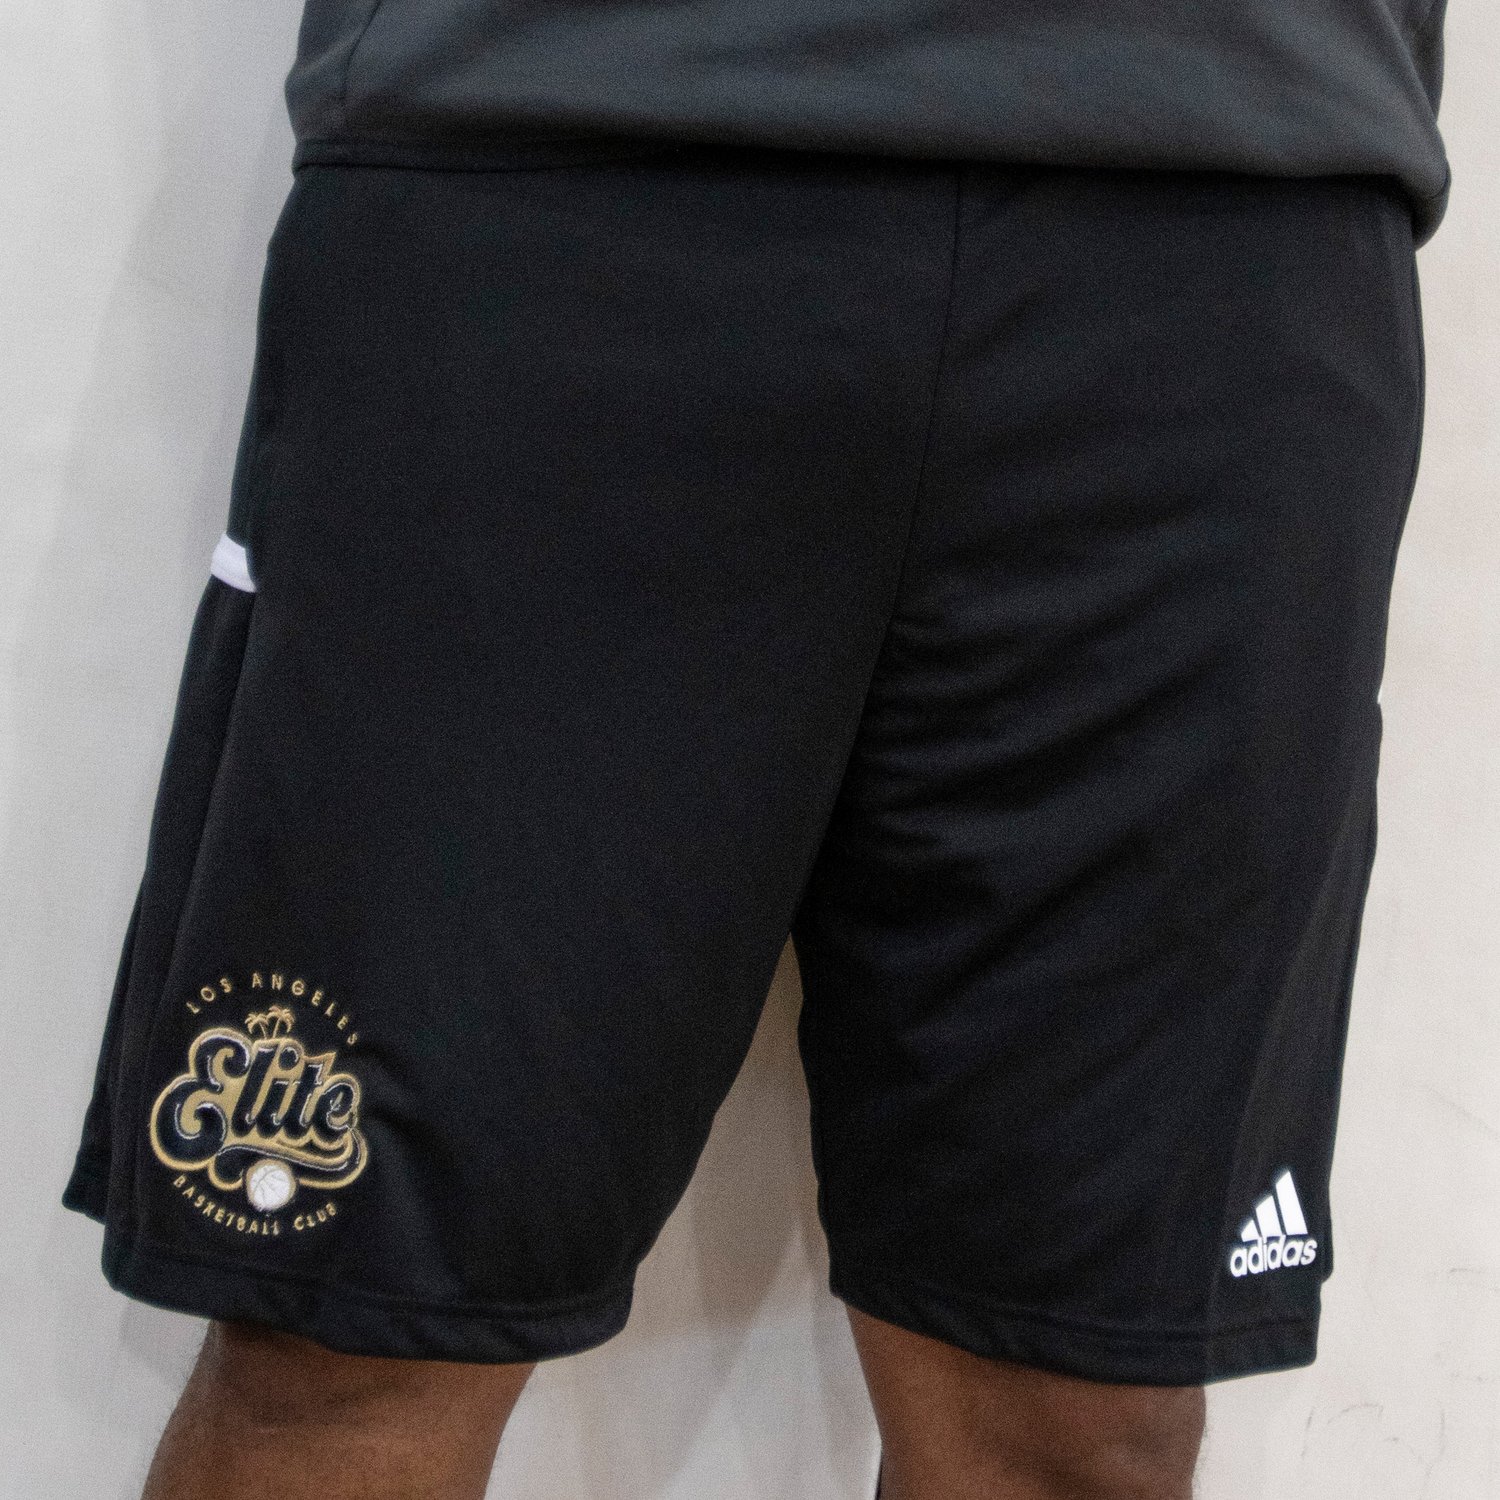 ATHLETIC SHORTS ANGELES LOS WELCOME ELITE TO —